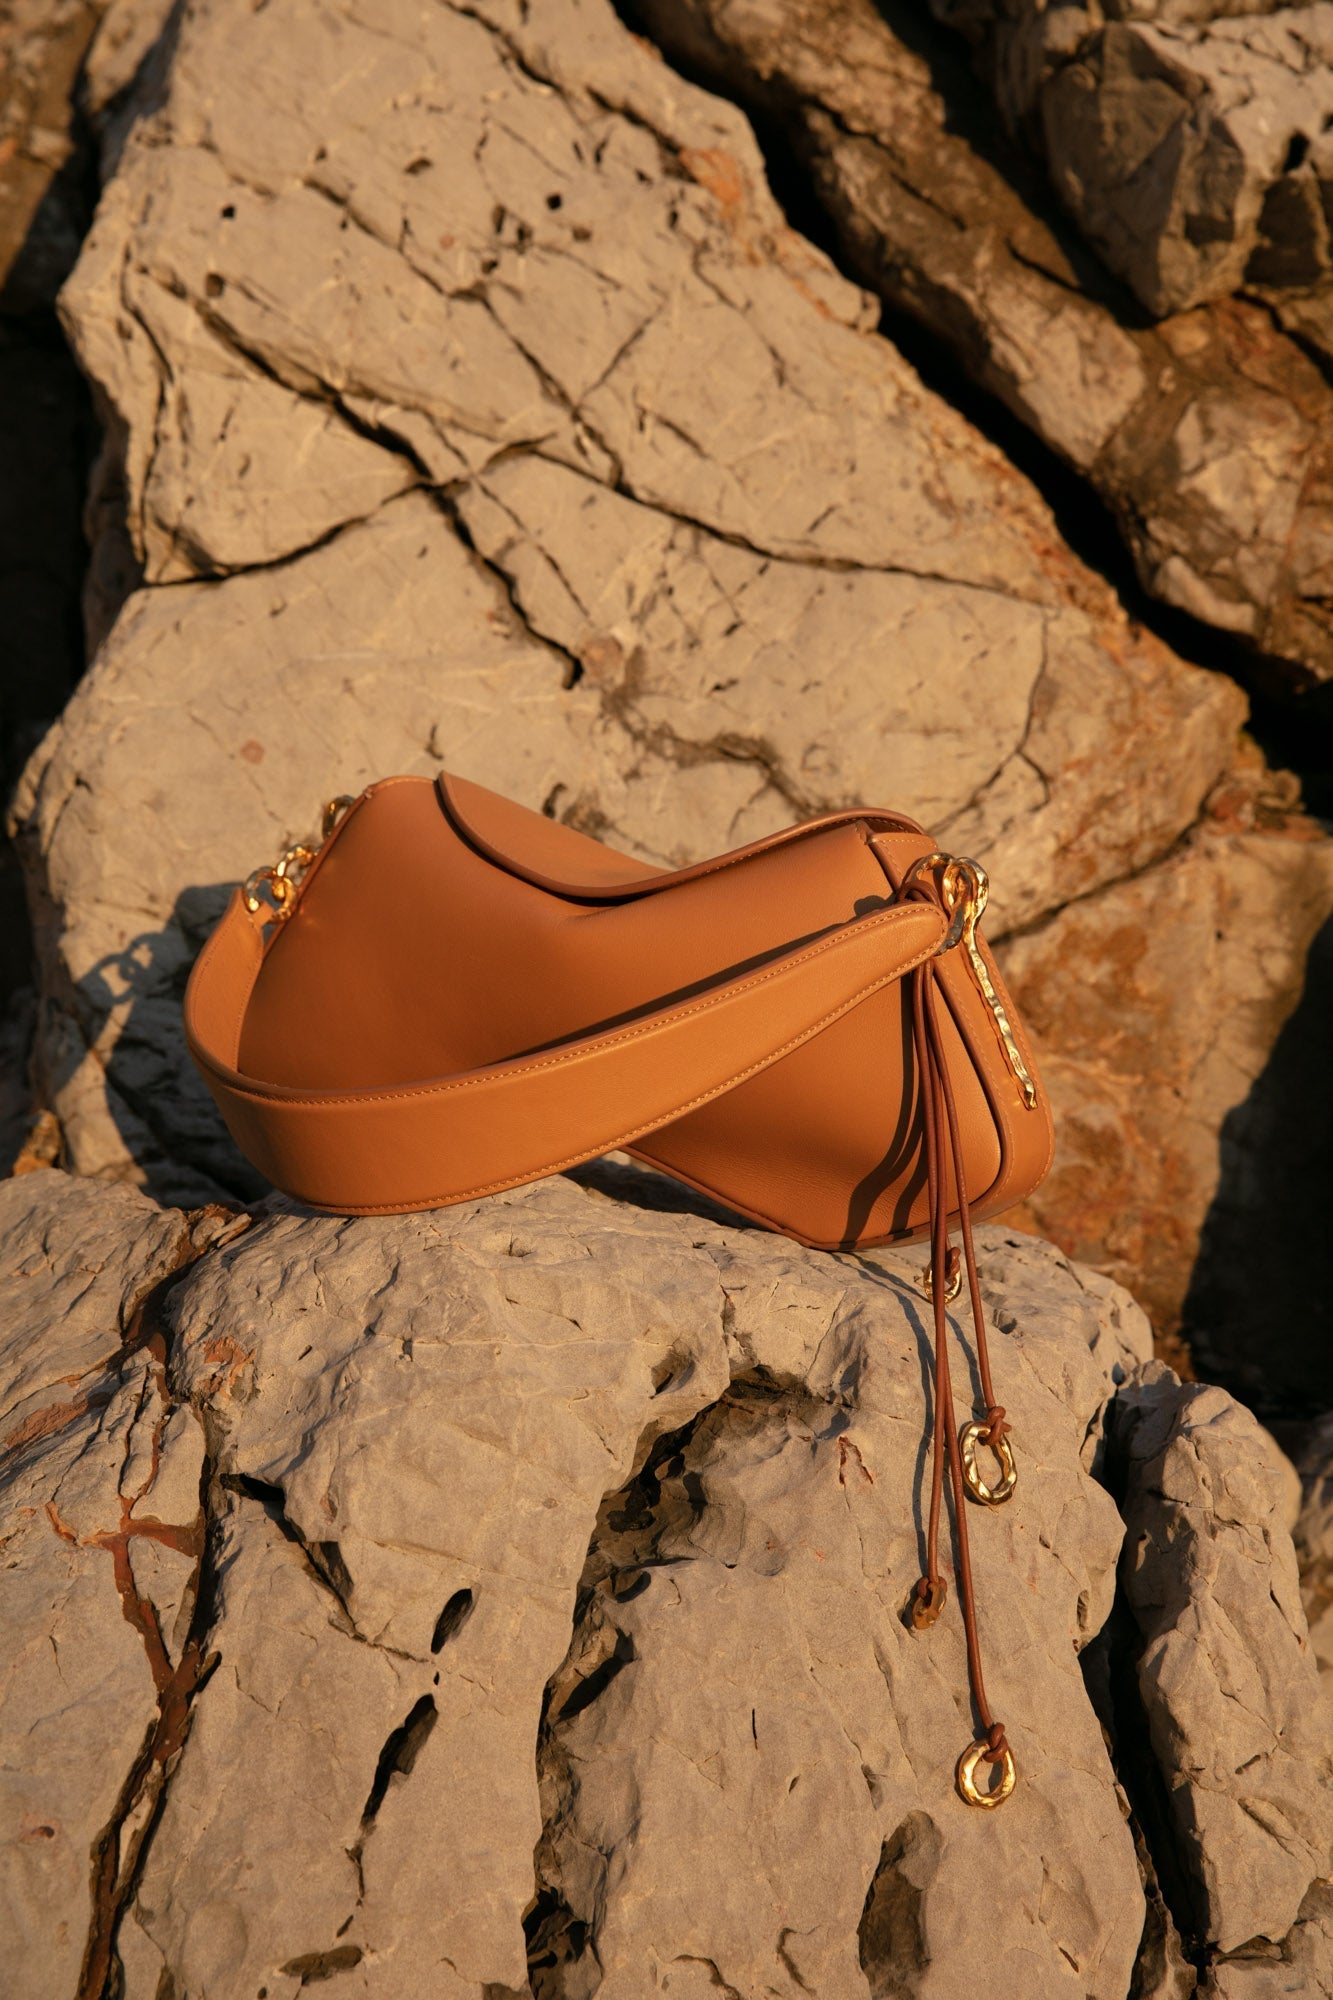  Deià handmade Nappa Leather Shoulder bag with Hanging Organic Rings senderkis caramel front view